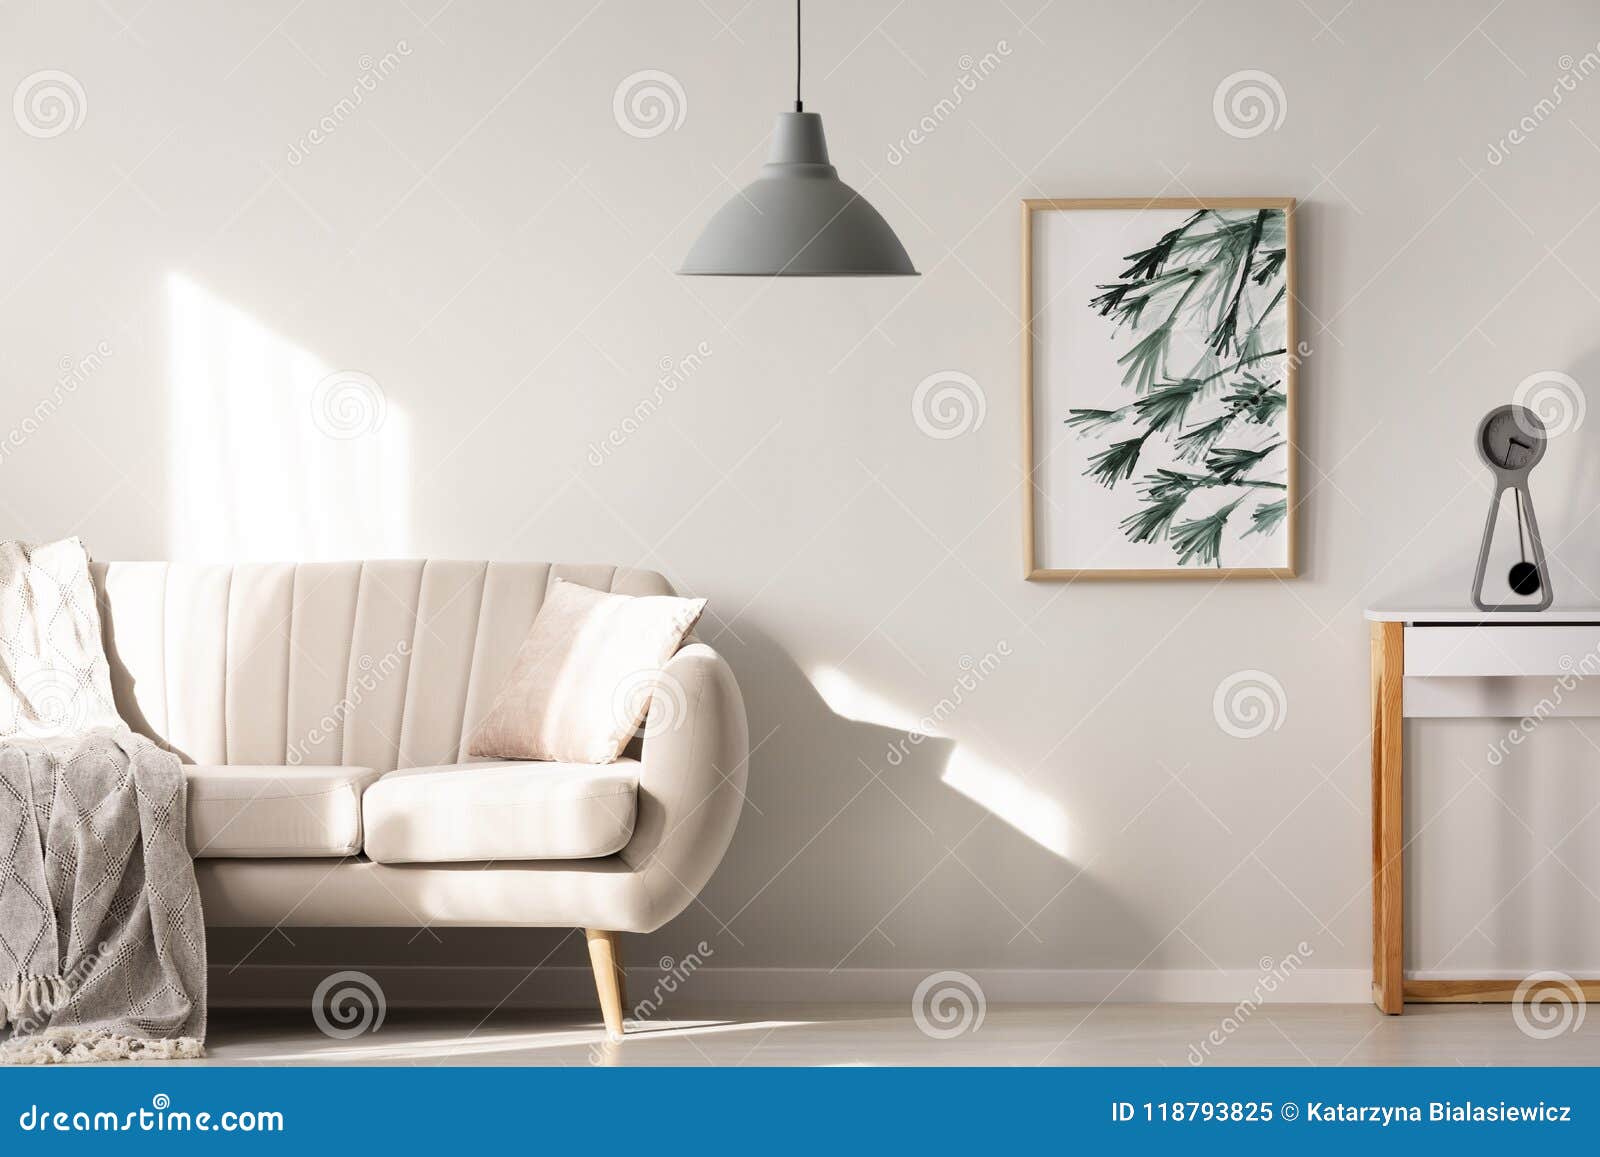 grey lamp in bright living room interior with poster next to bei